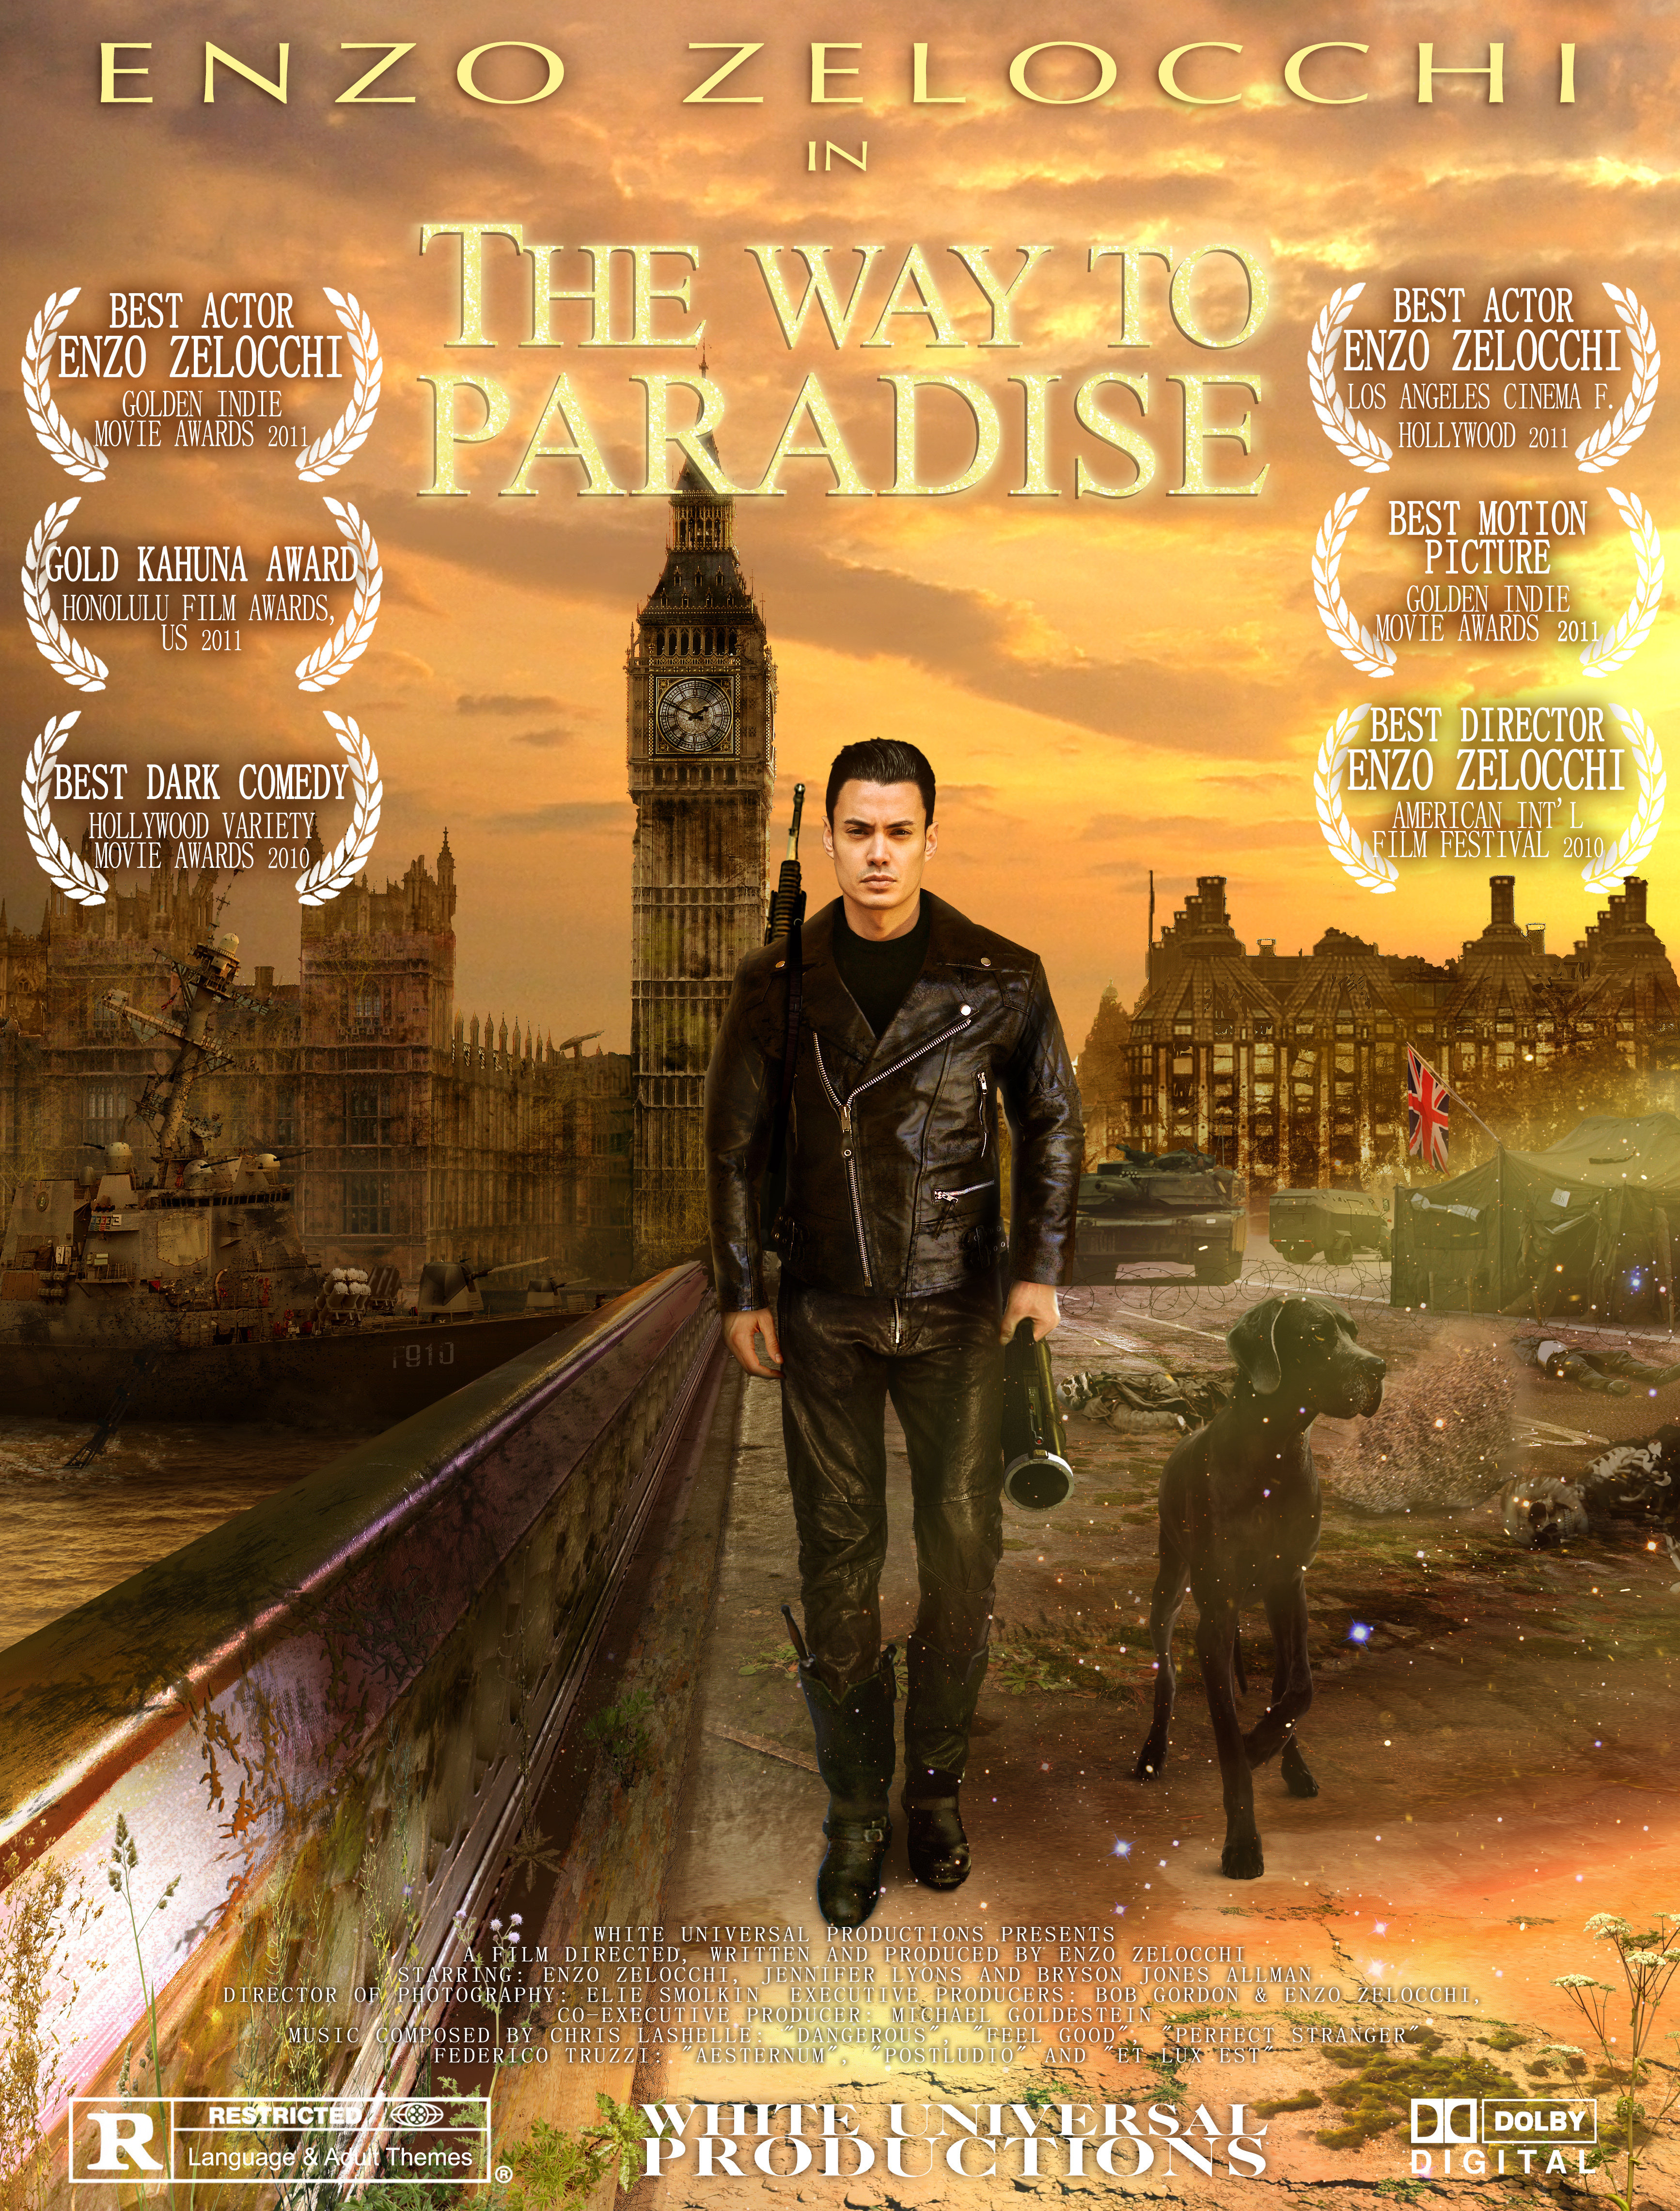 Enzo Zelocchi in The Way to Paradise (2011)